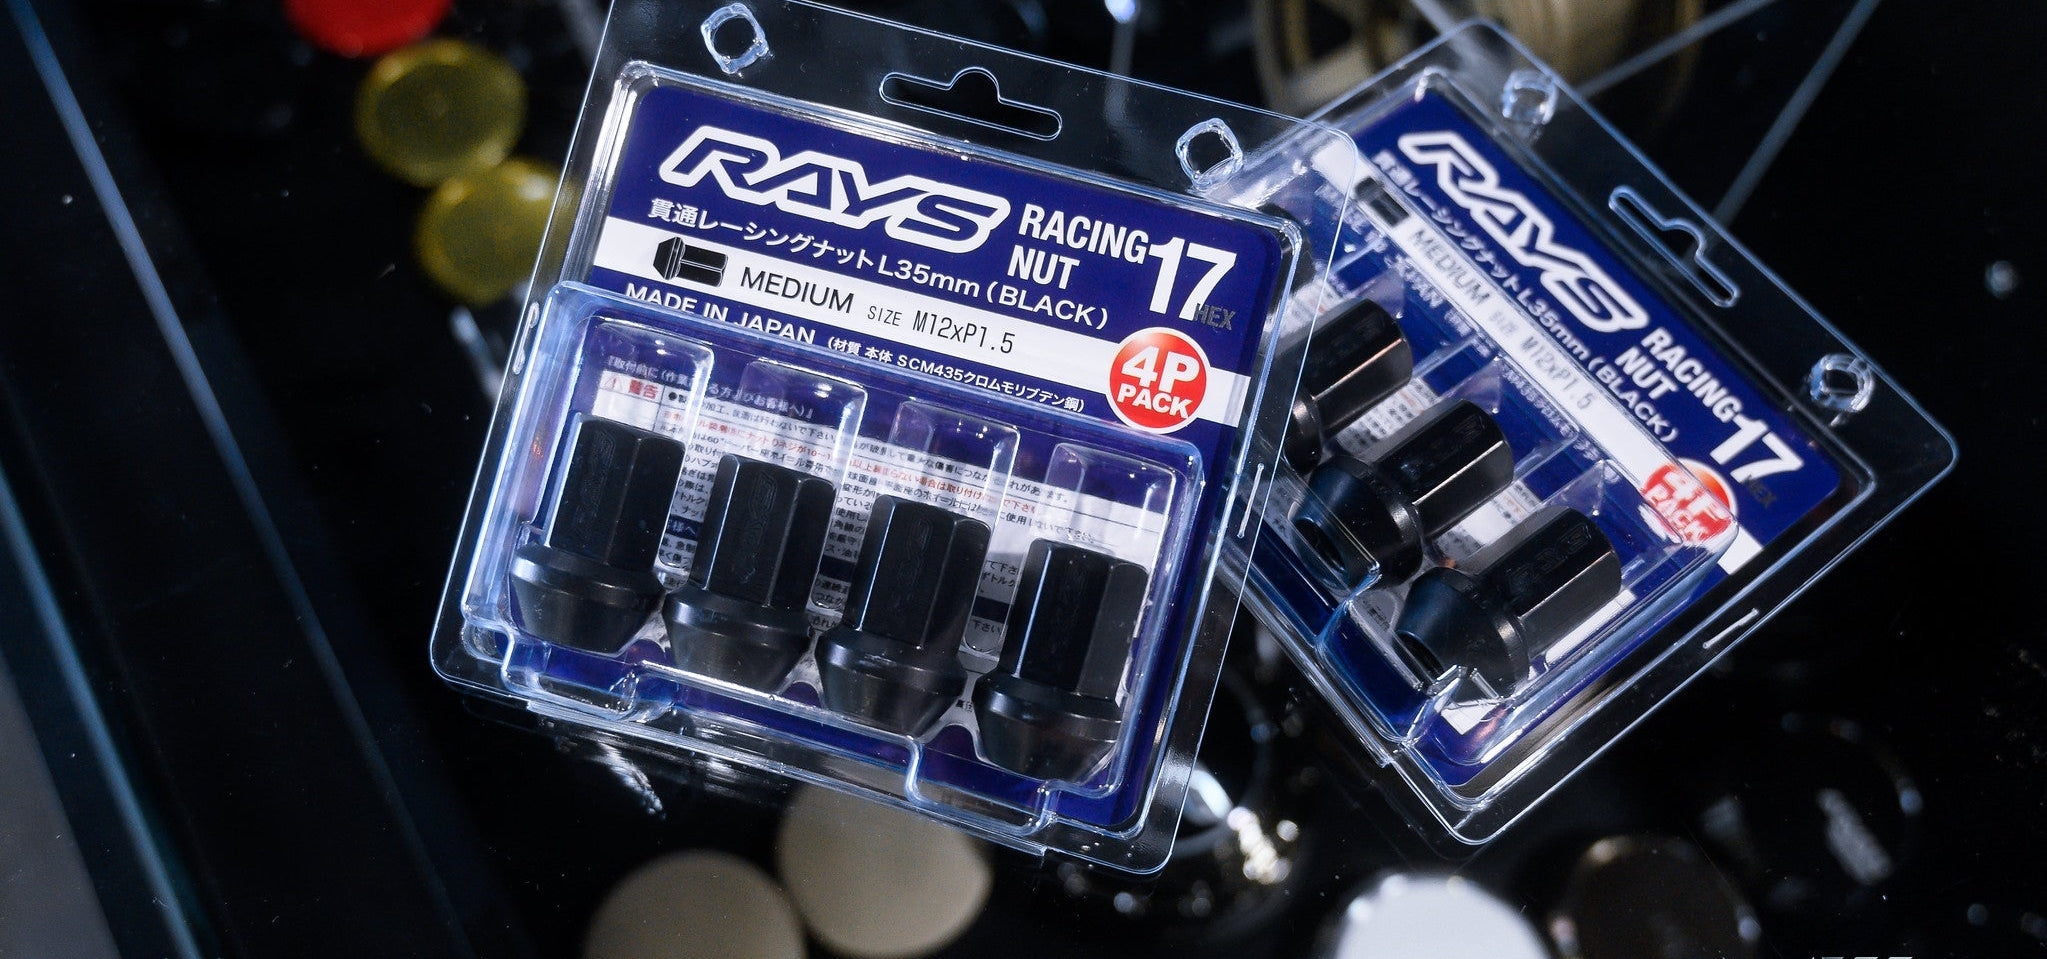 RAYS 17HEX L35 Racing Nut Medium Type - Premium Wheet Nuts from RAYS - From just $209.00! Shop now at MK MOTORSPORTS